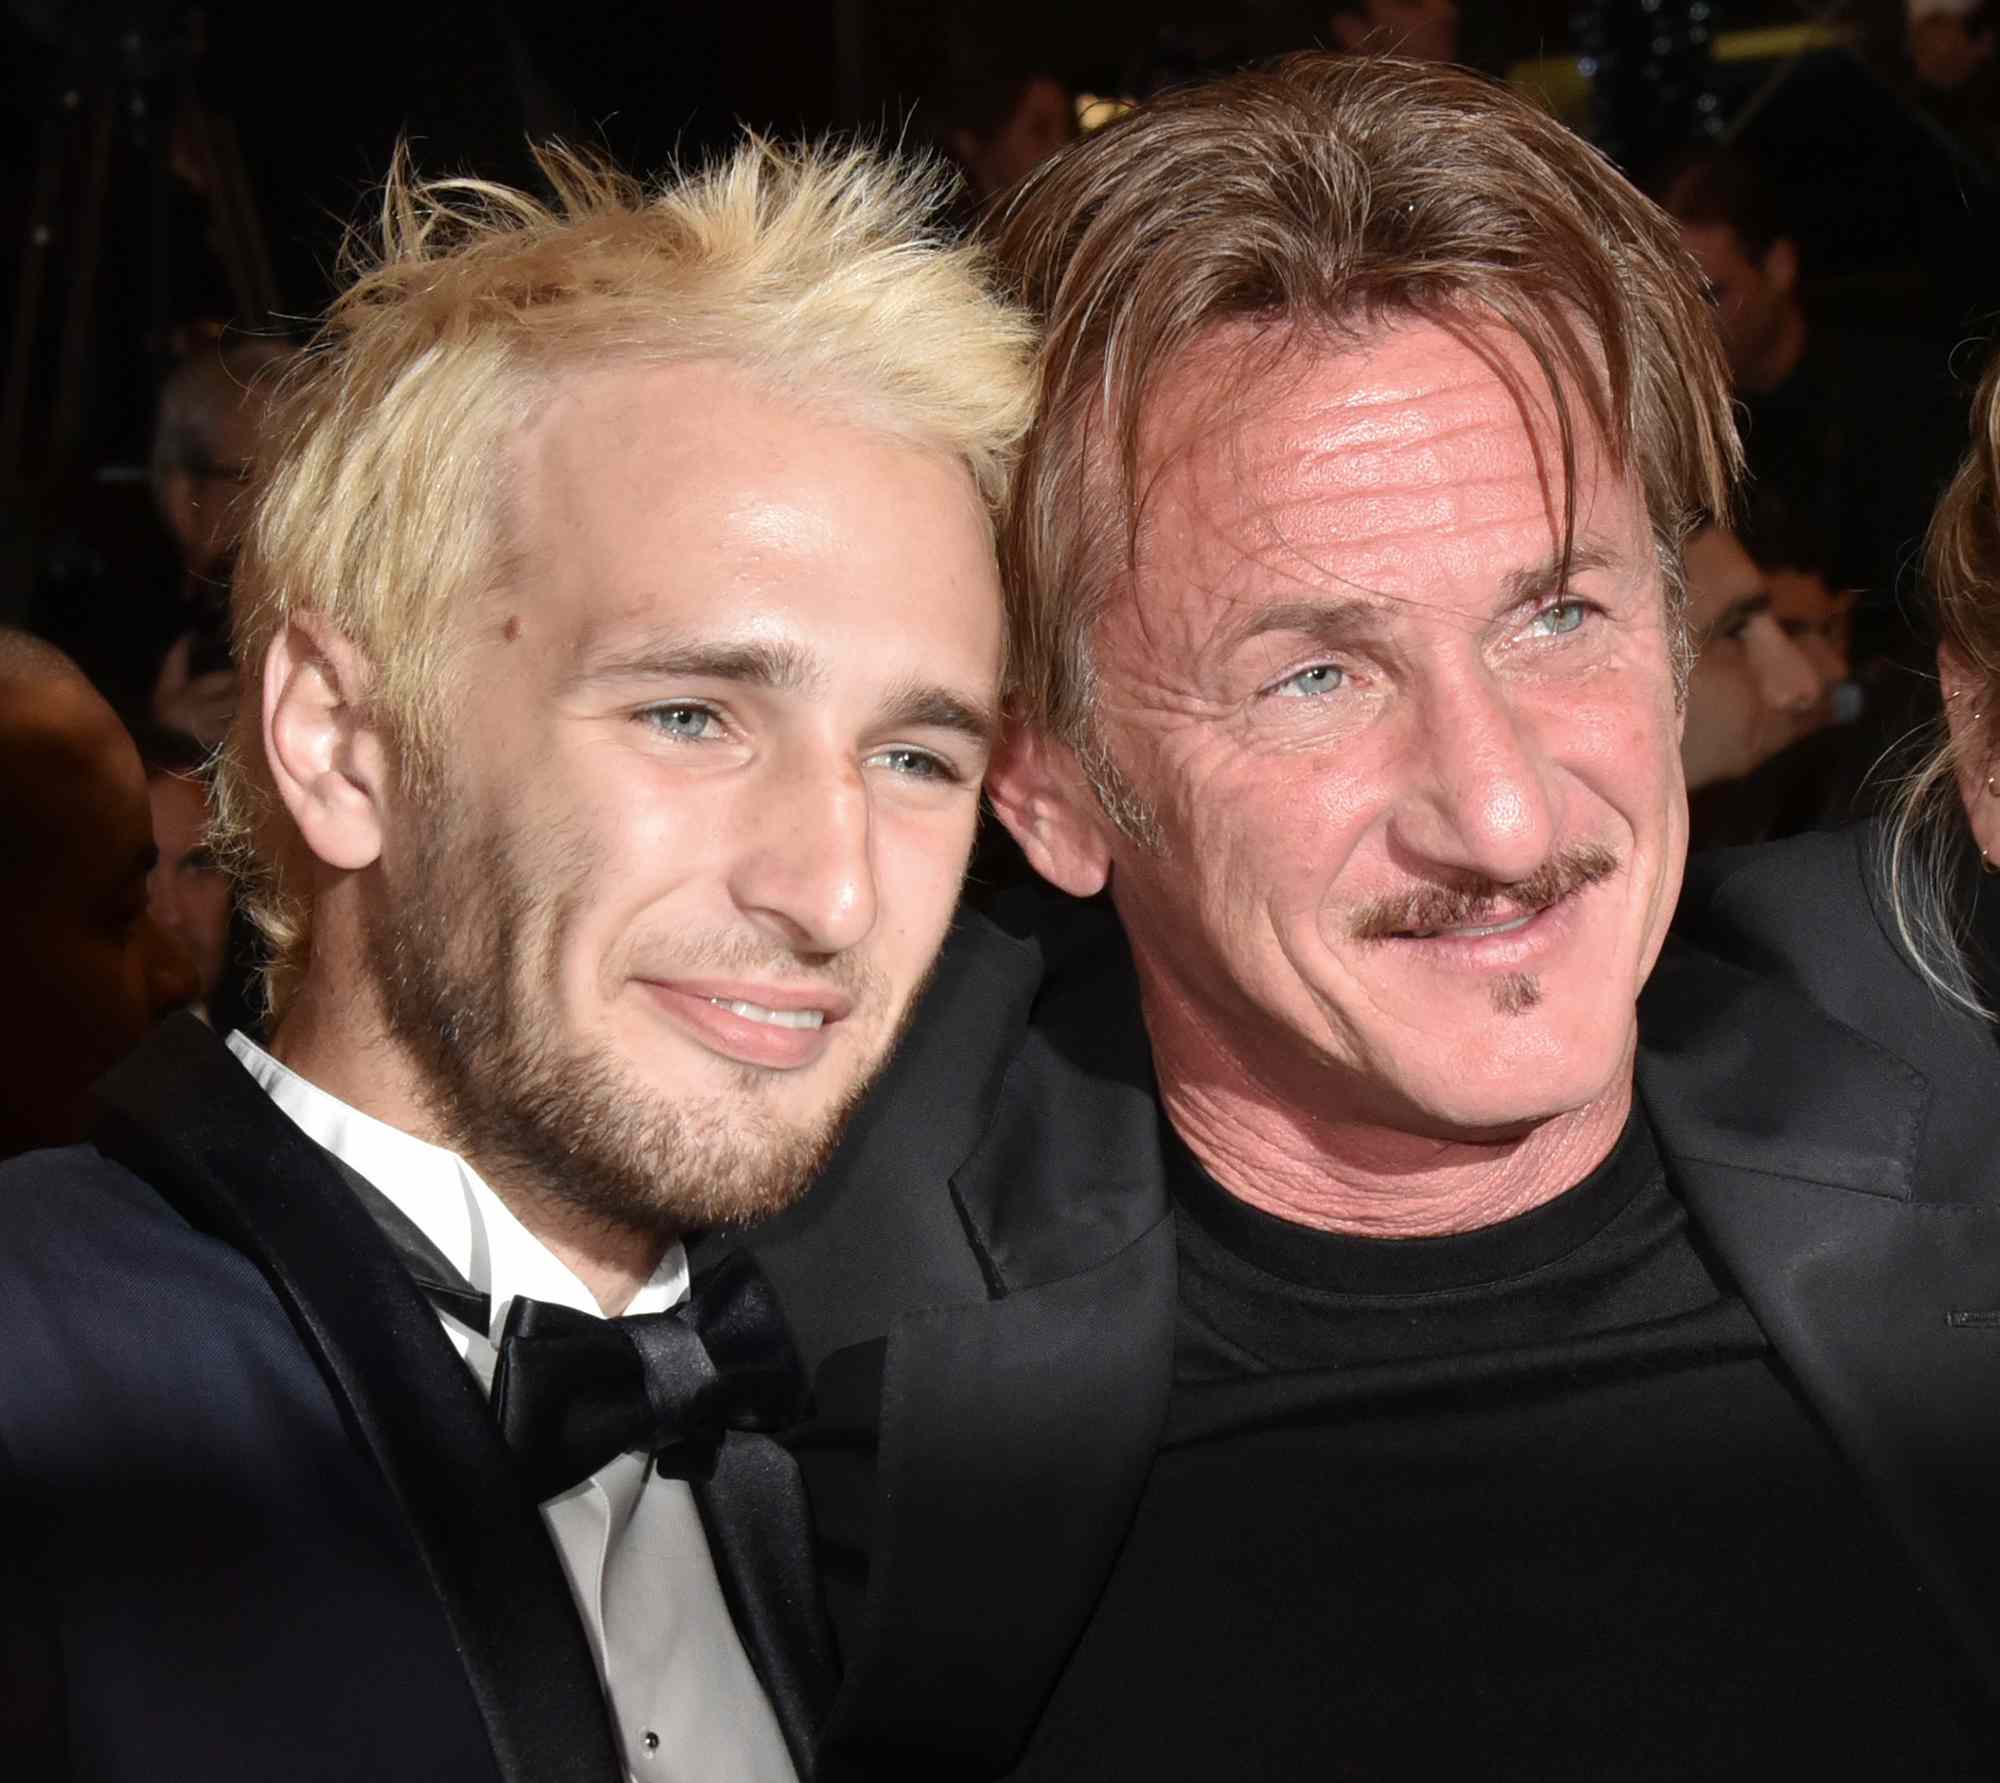 Hopper Penn and his father director Sean Penn attend 'The Last Face' Premiere during the 69th annual Cannes Film Festival at the Palais des Festivals on May 20, 2016 in Cannes, France